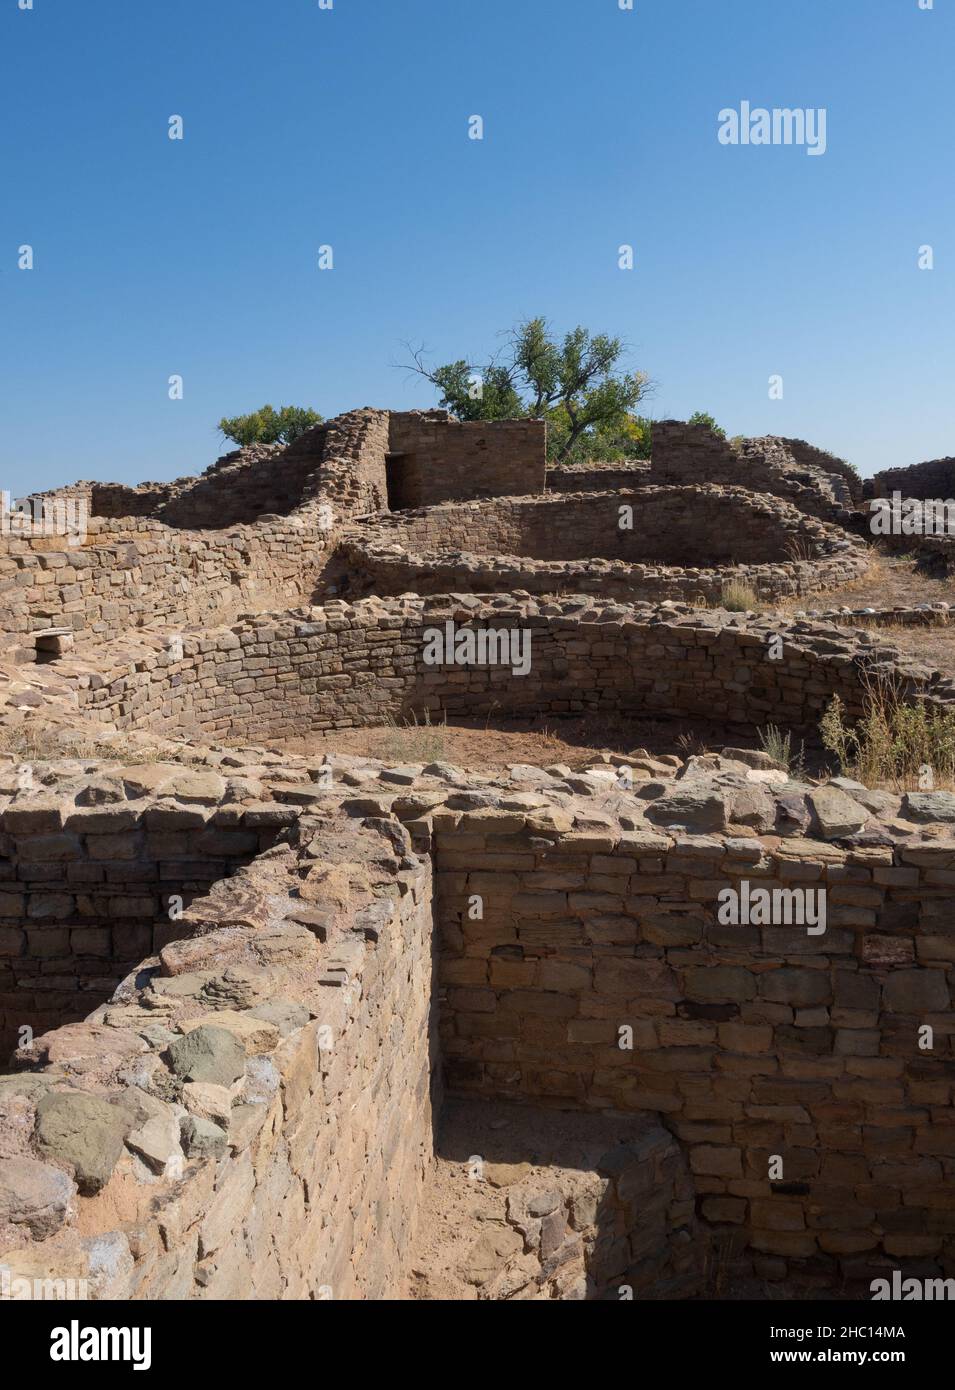 Remains of low stone walls from buildings and circular kivas at Aztec Ruins National Monument in Aztec, New Mexico. Stock Photo